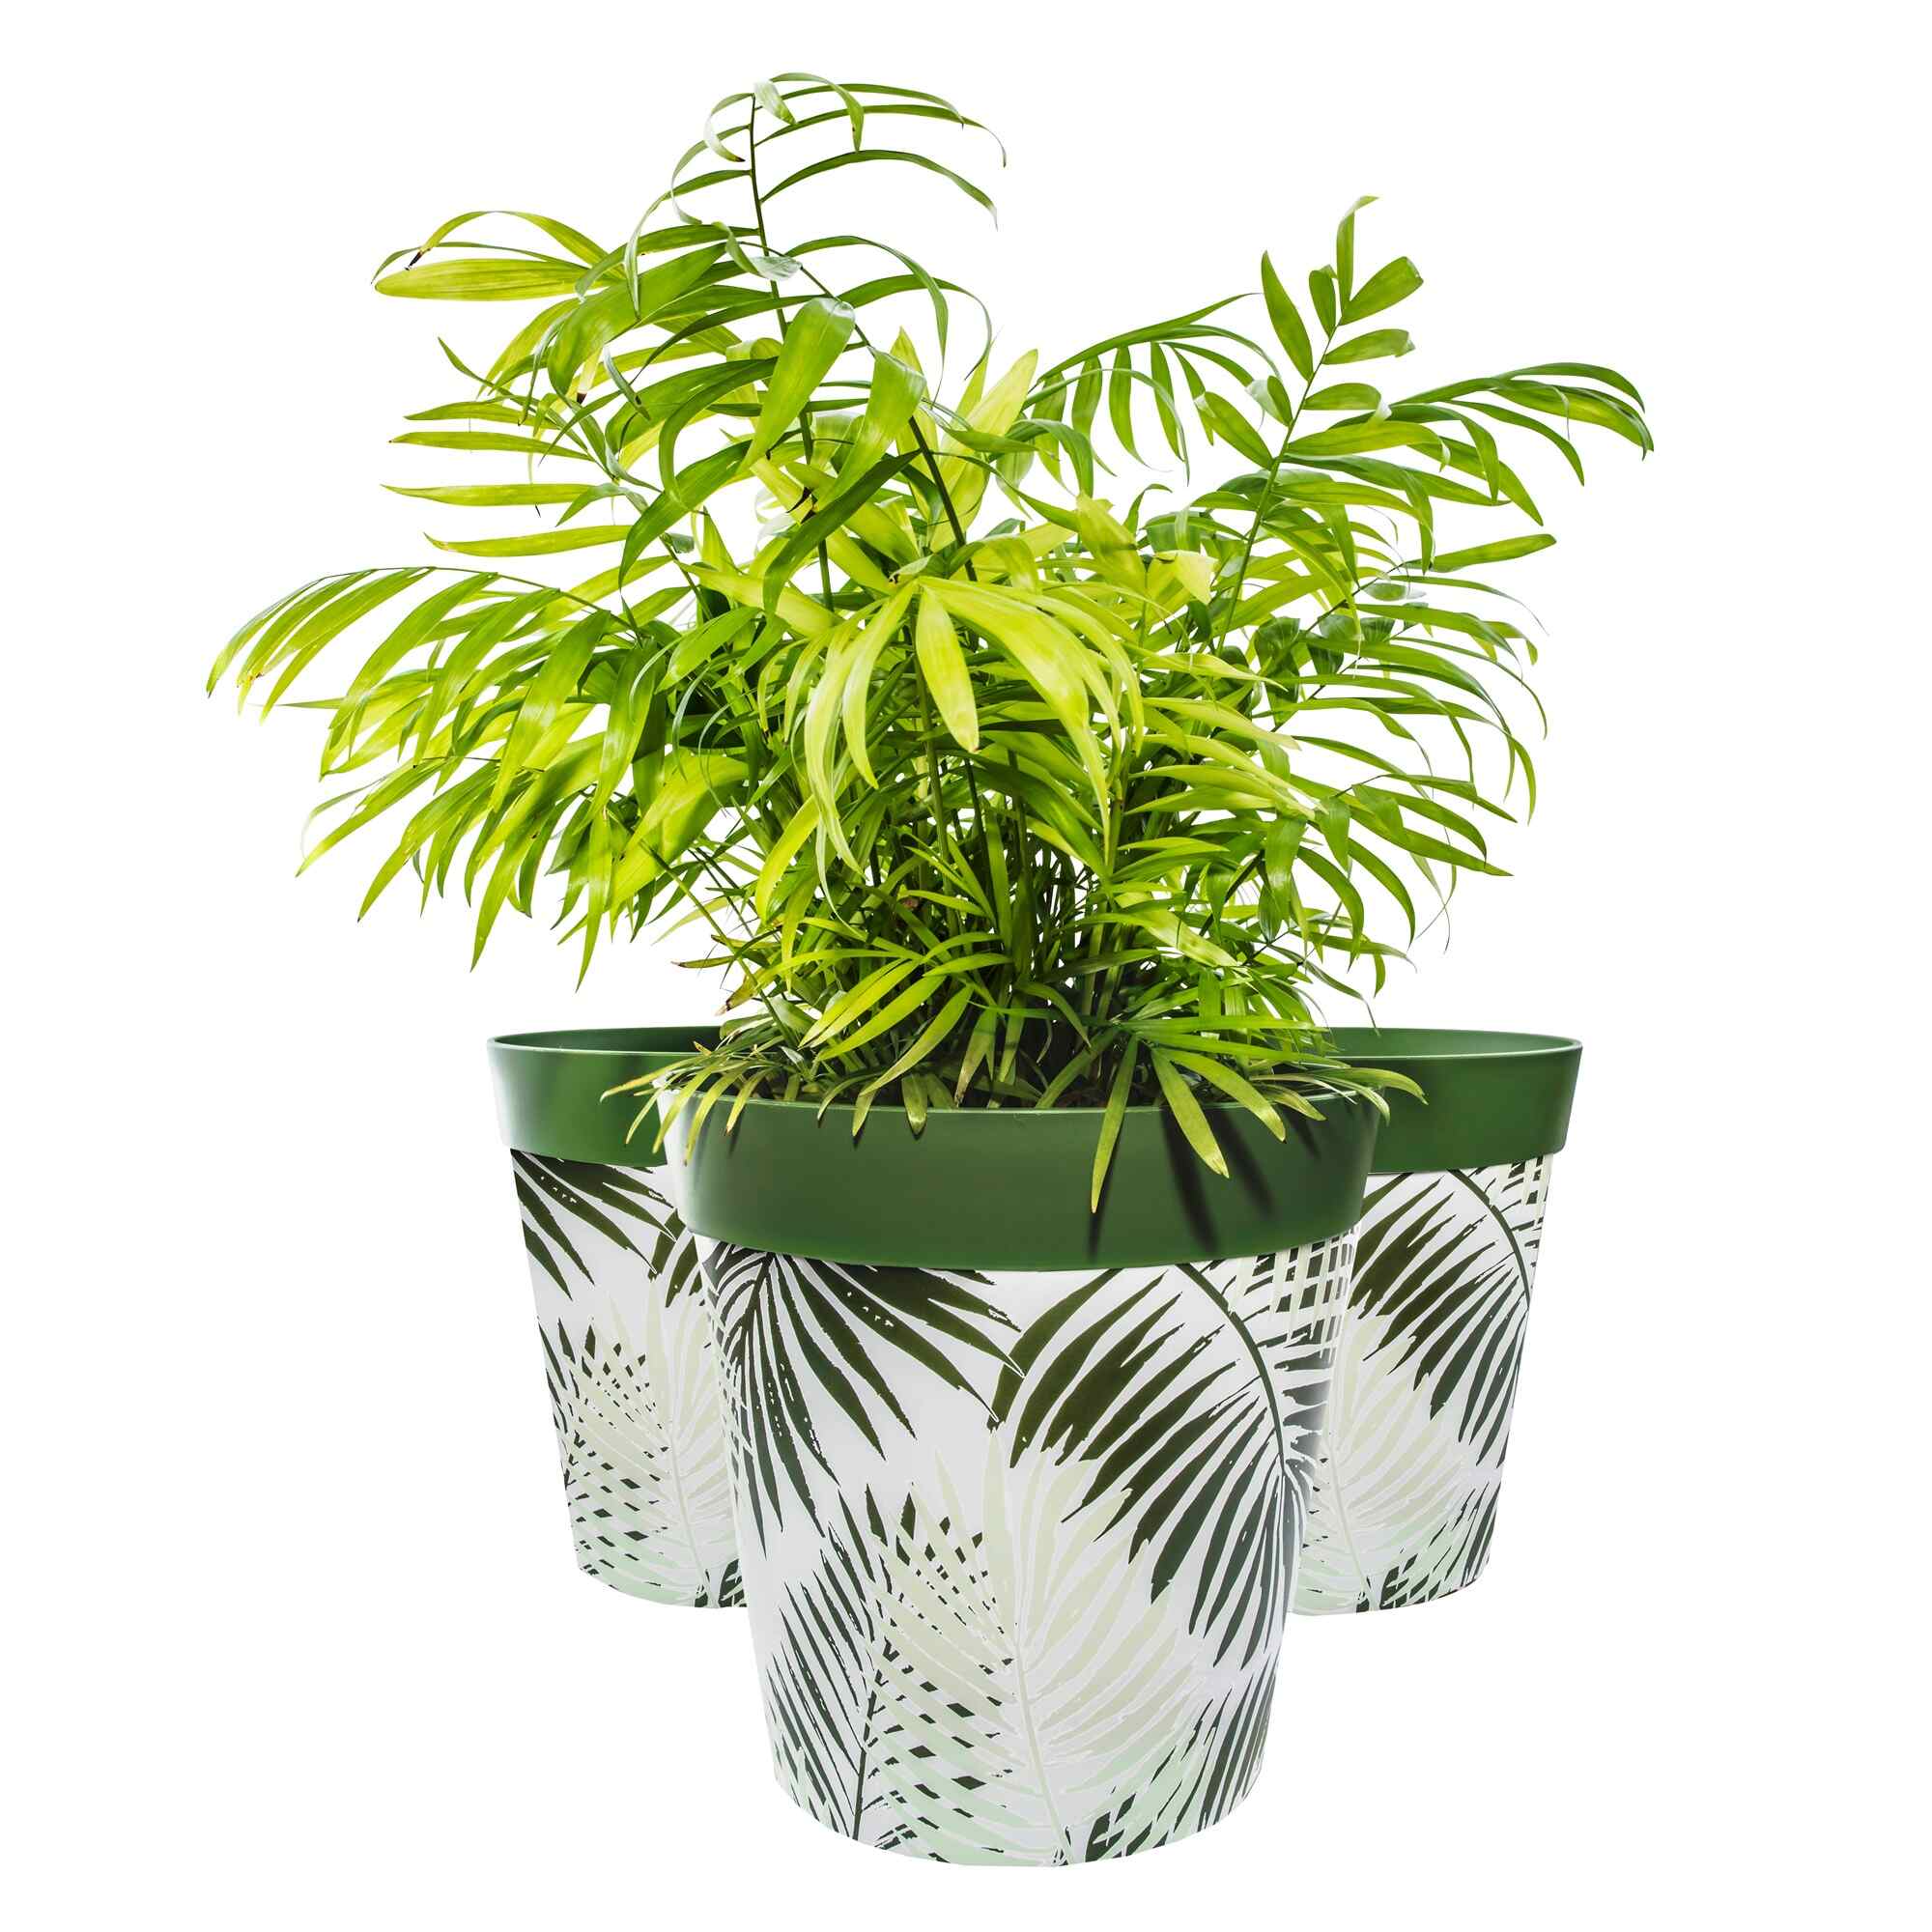 Picture of 3 Planted Large 25cm Green Fern Leaves Plastic Indoor/Outdoor Flowerpots